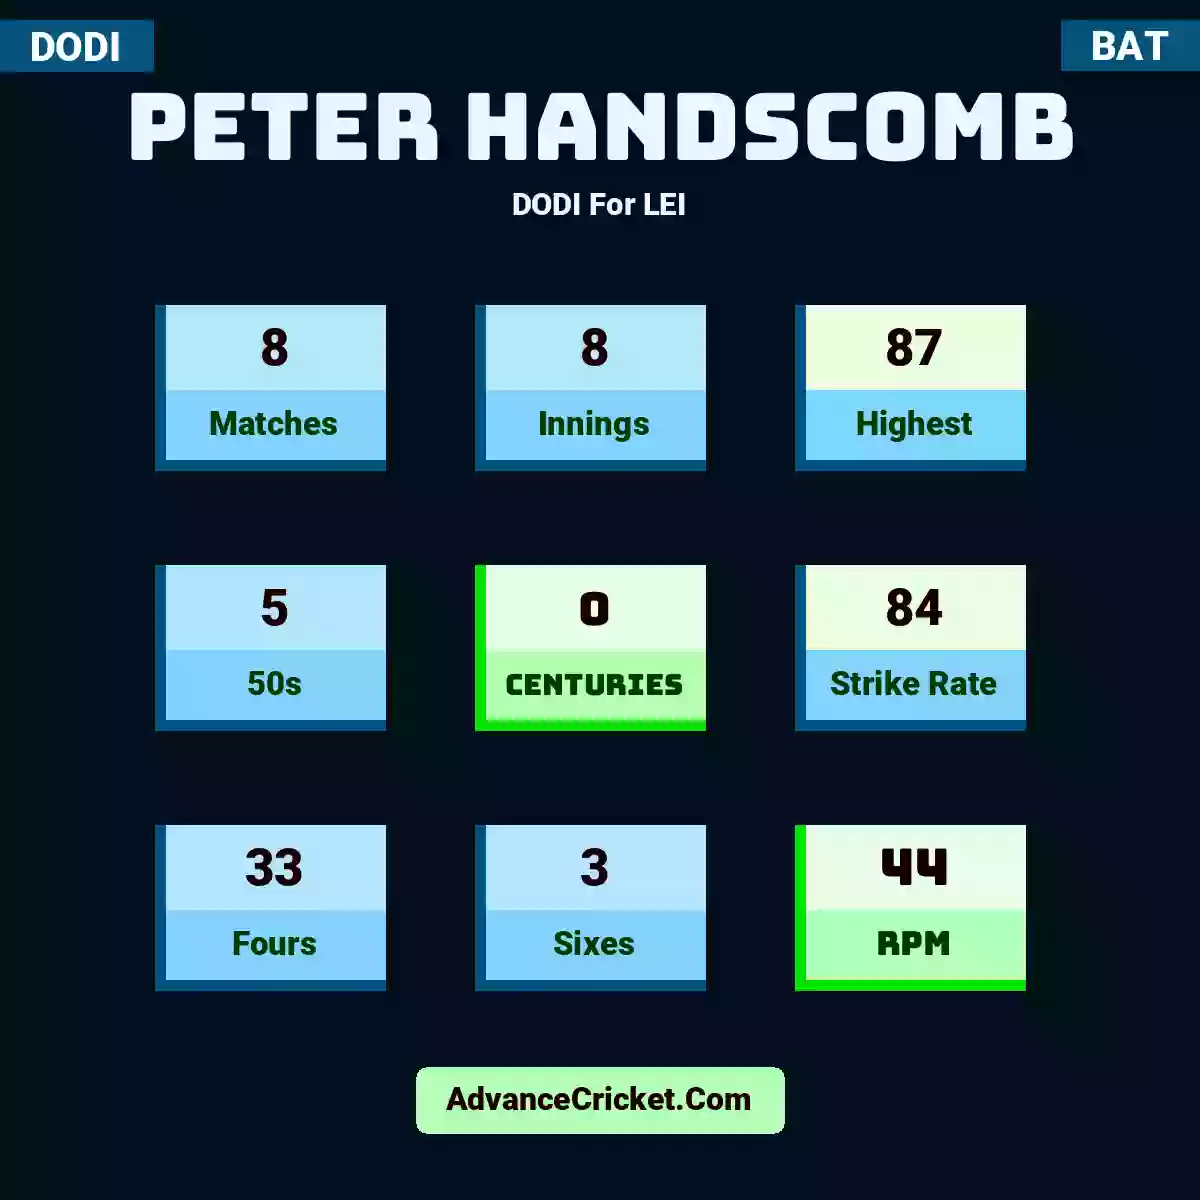 Peter Handscomb DODI  For LEI, Peter Handscomb played 8 matches, scored 87 runs as highest, 5 half-centuries, and 0 centuries, with a strike rate of 84. P.Handscomb hit 33 fours and 3 sixes, with an RPM of 44.